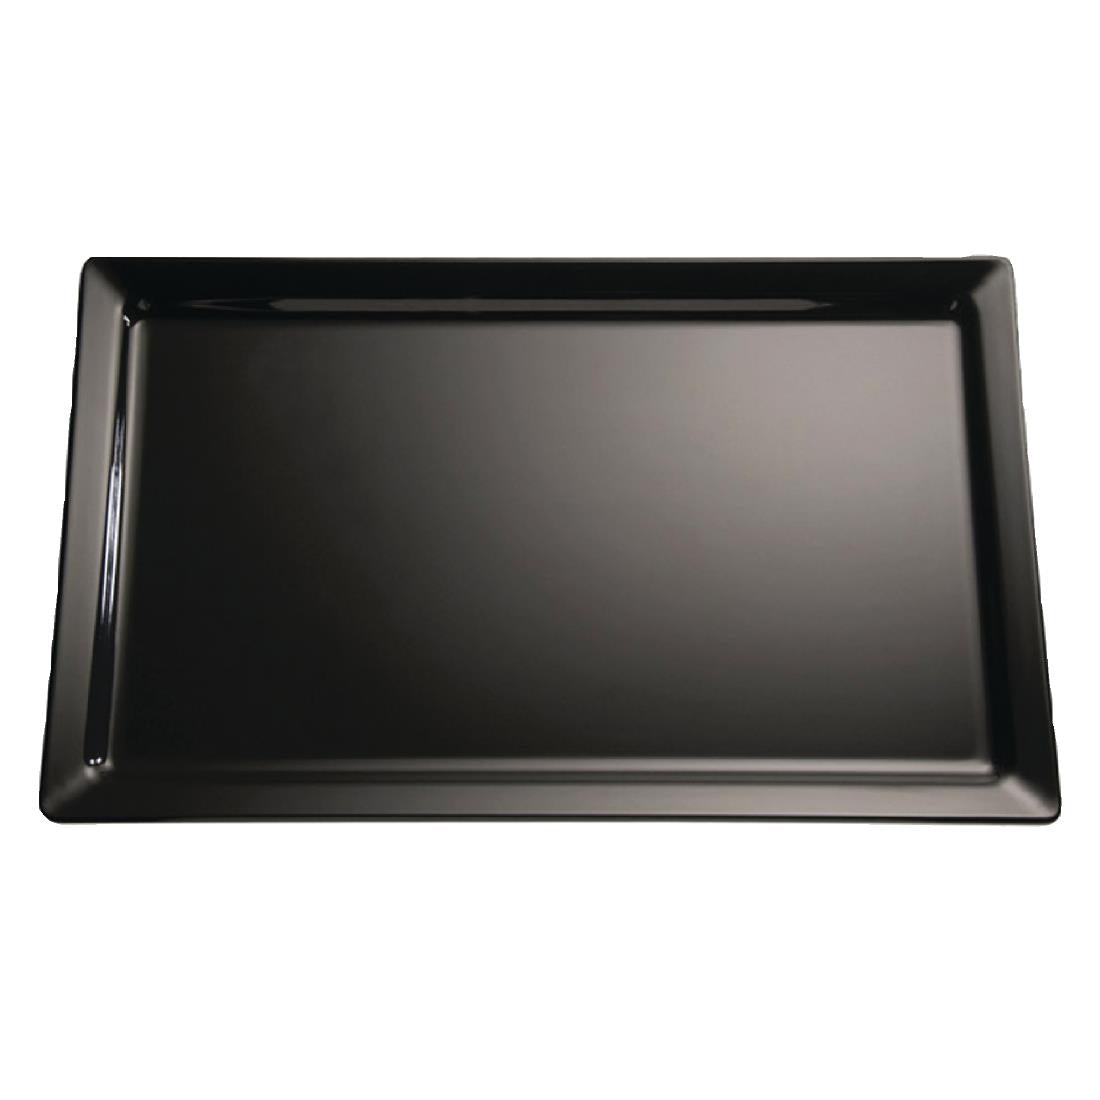 GF127 APS Pure Melamine Tray Black GN 1/4 JD Catering Equipment Solutions Ltd